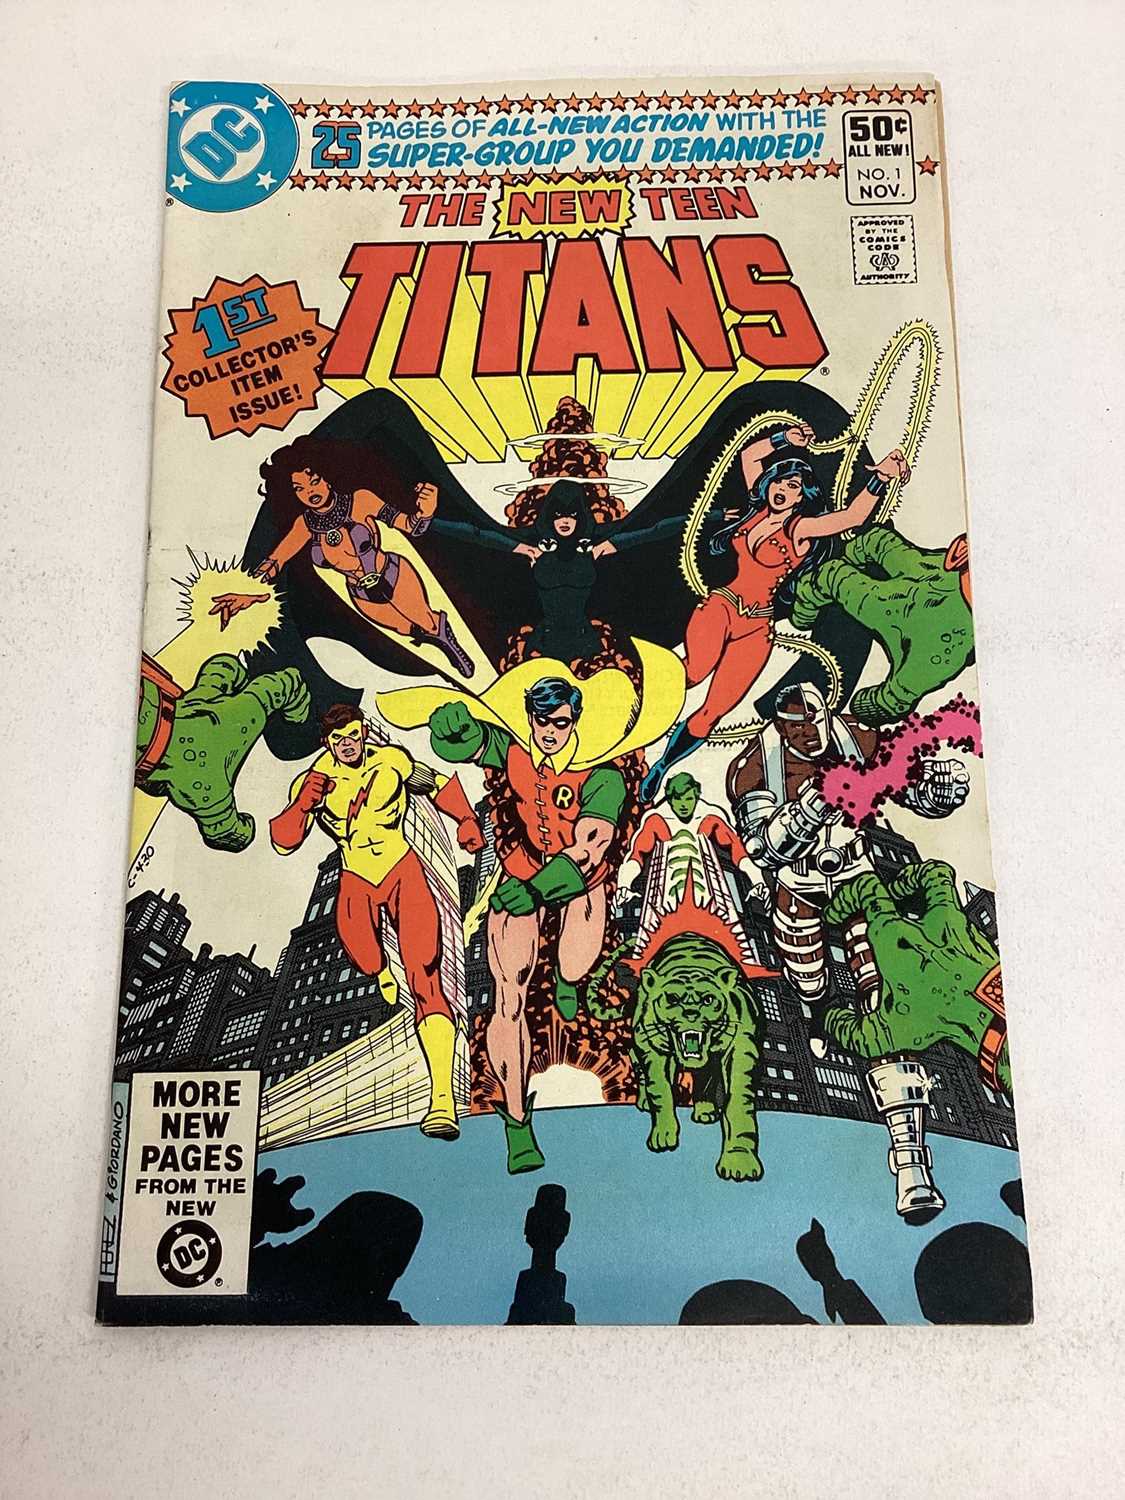 Large quantity of 1980's DC Comics, The New Teen Titans #1 #3-41 #45-47 together with Two annuals #1 - Image 6 of 12